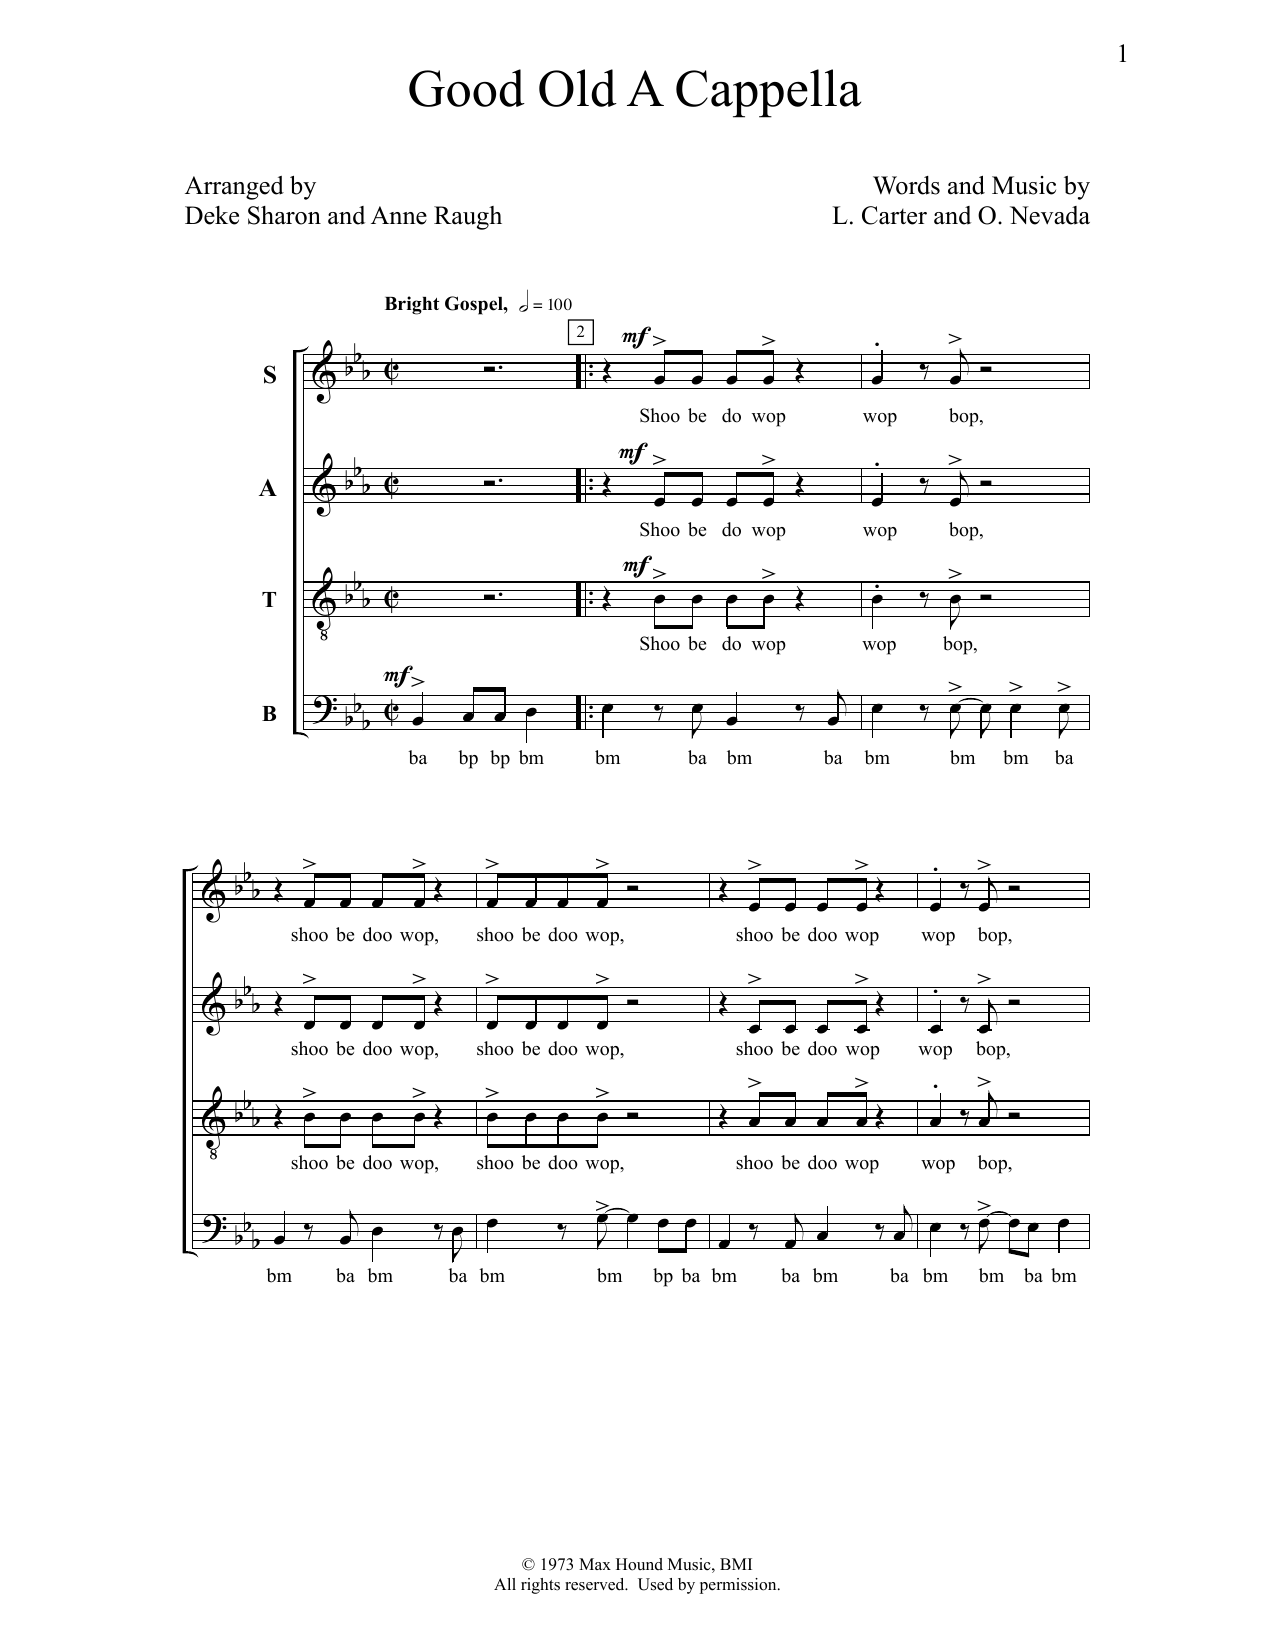 Good Old A Cappella sheet music